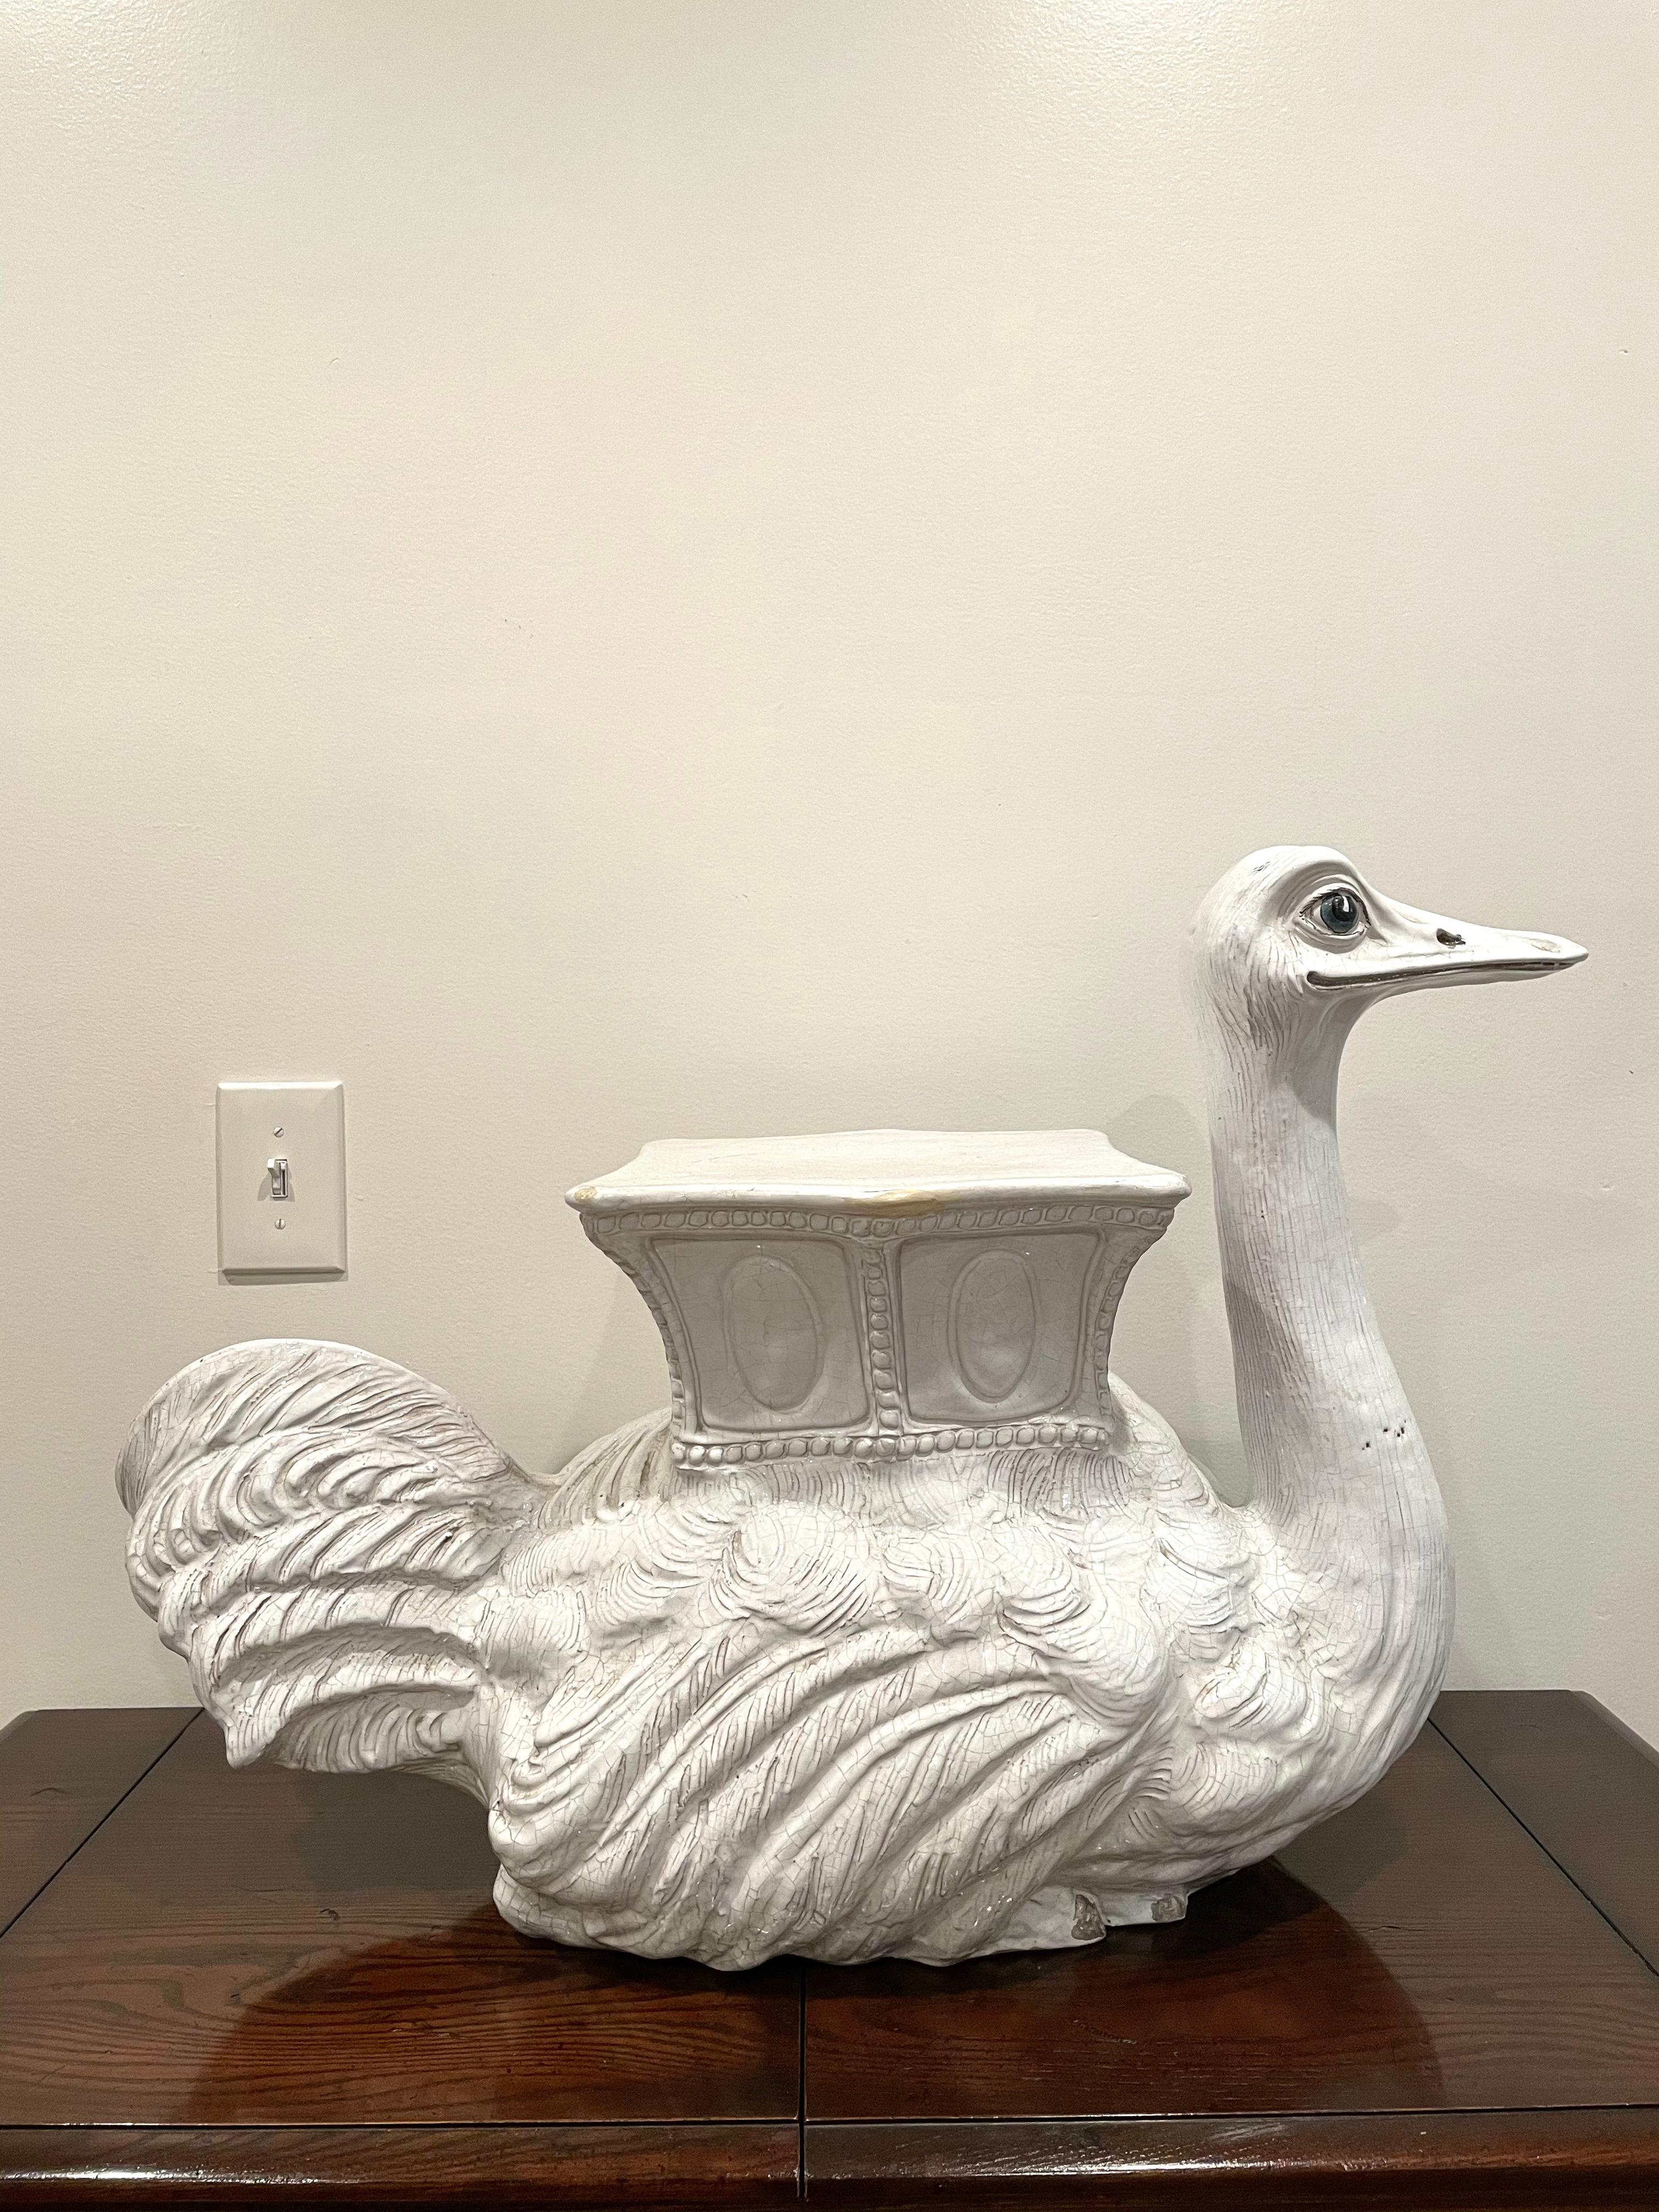 Classic whimsical Italian white glazed terracotta garden seat or garden stool of an ostrich. This blanc de chine garden ornament can be used indoors or outdoors as a side table or end table. A versatile Italian Hollywood Regency piece that would